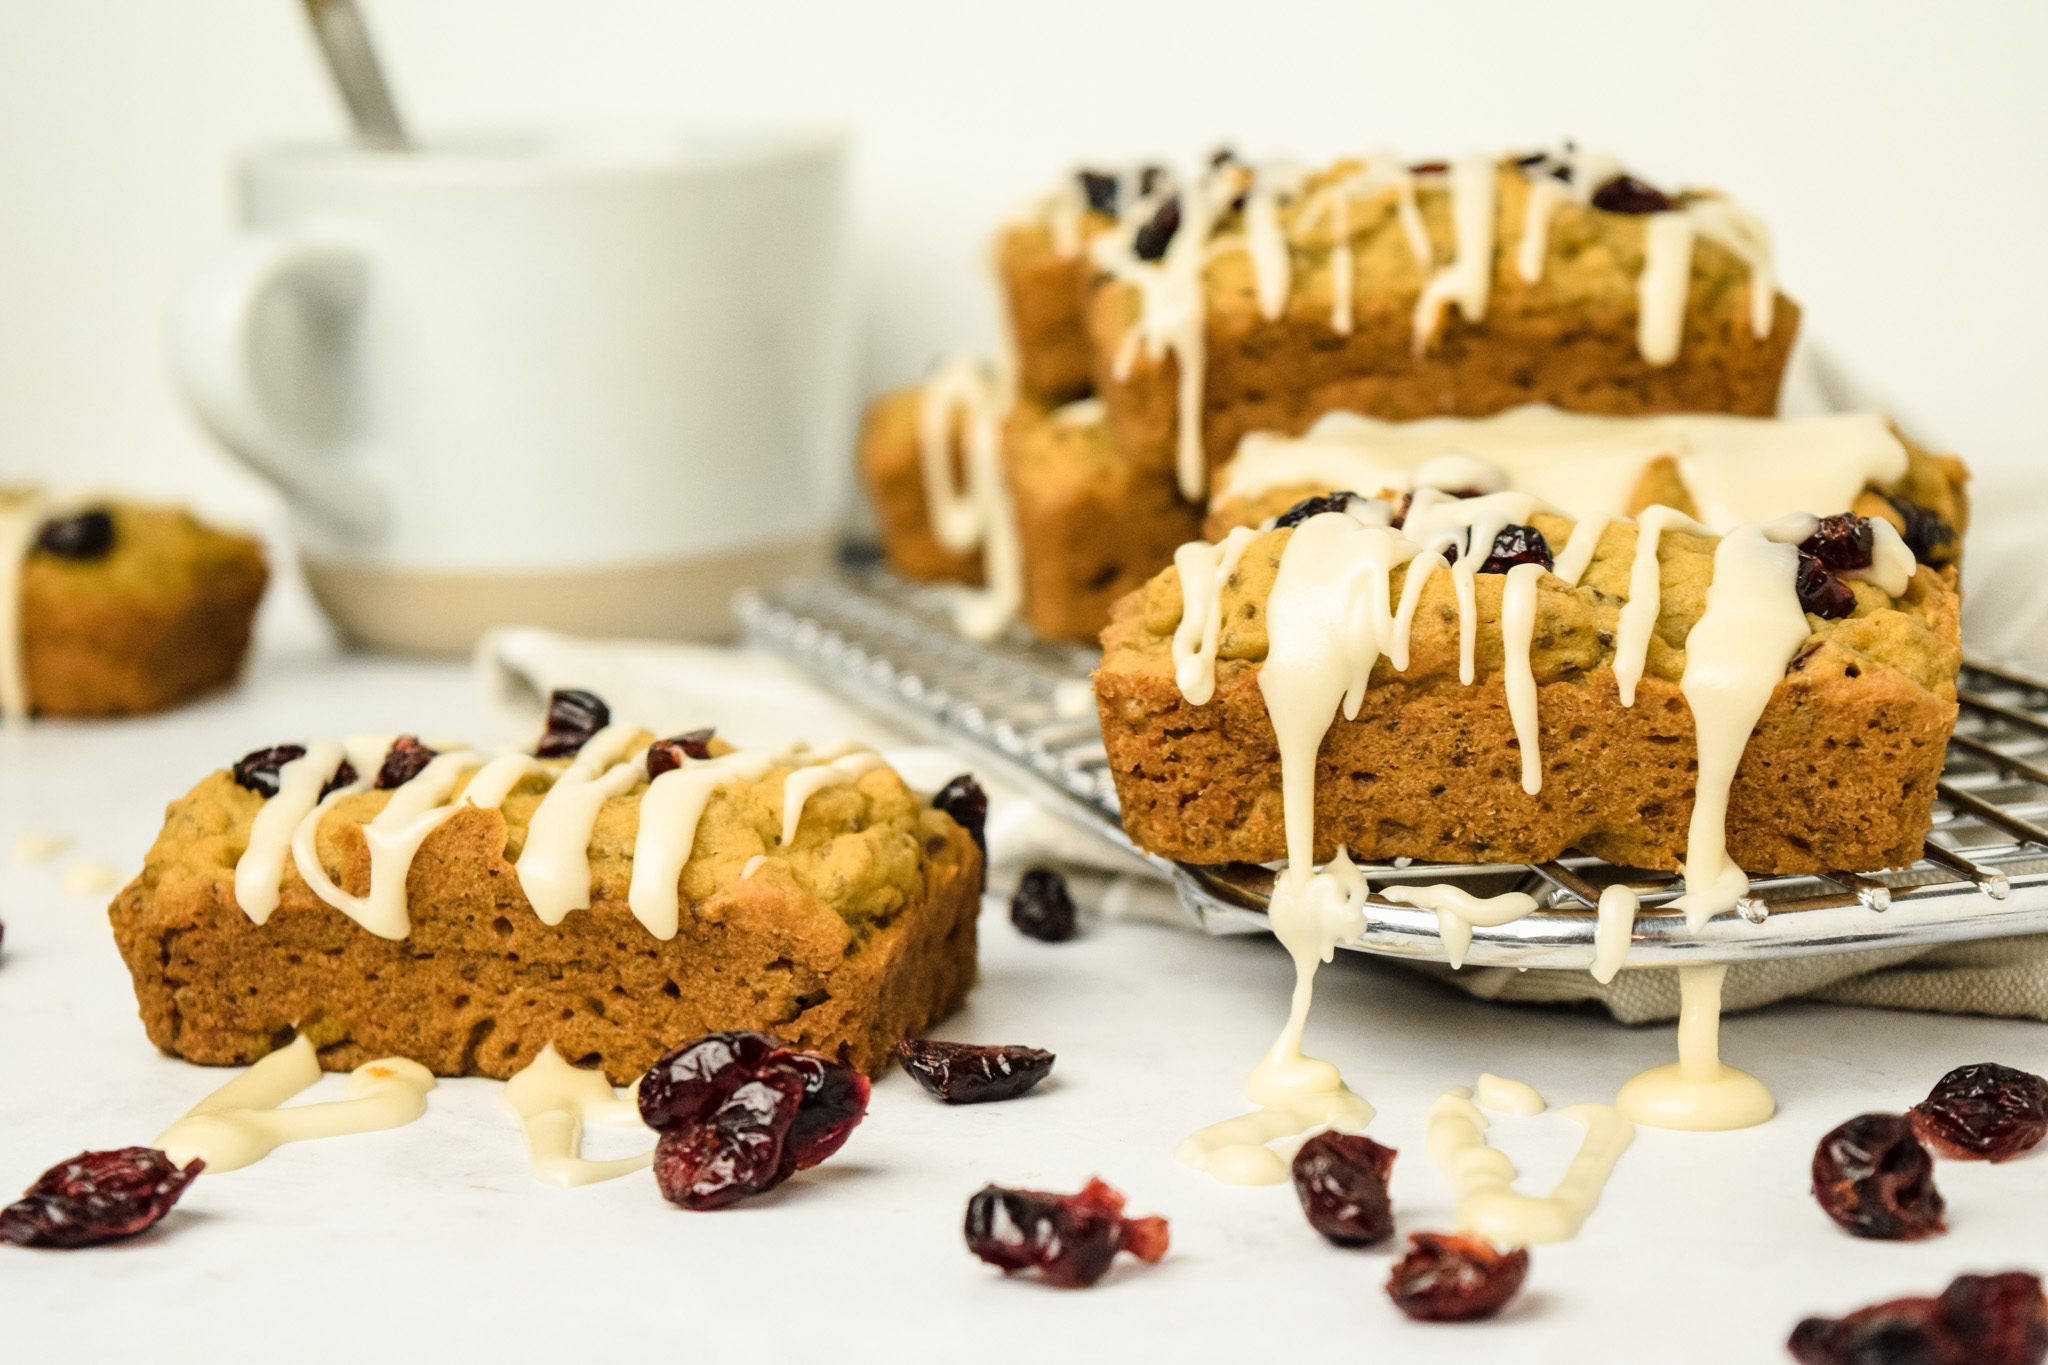 Gluten Free Cranberry Orange Loaf with Vanilla Drizzle